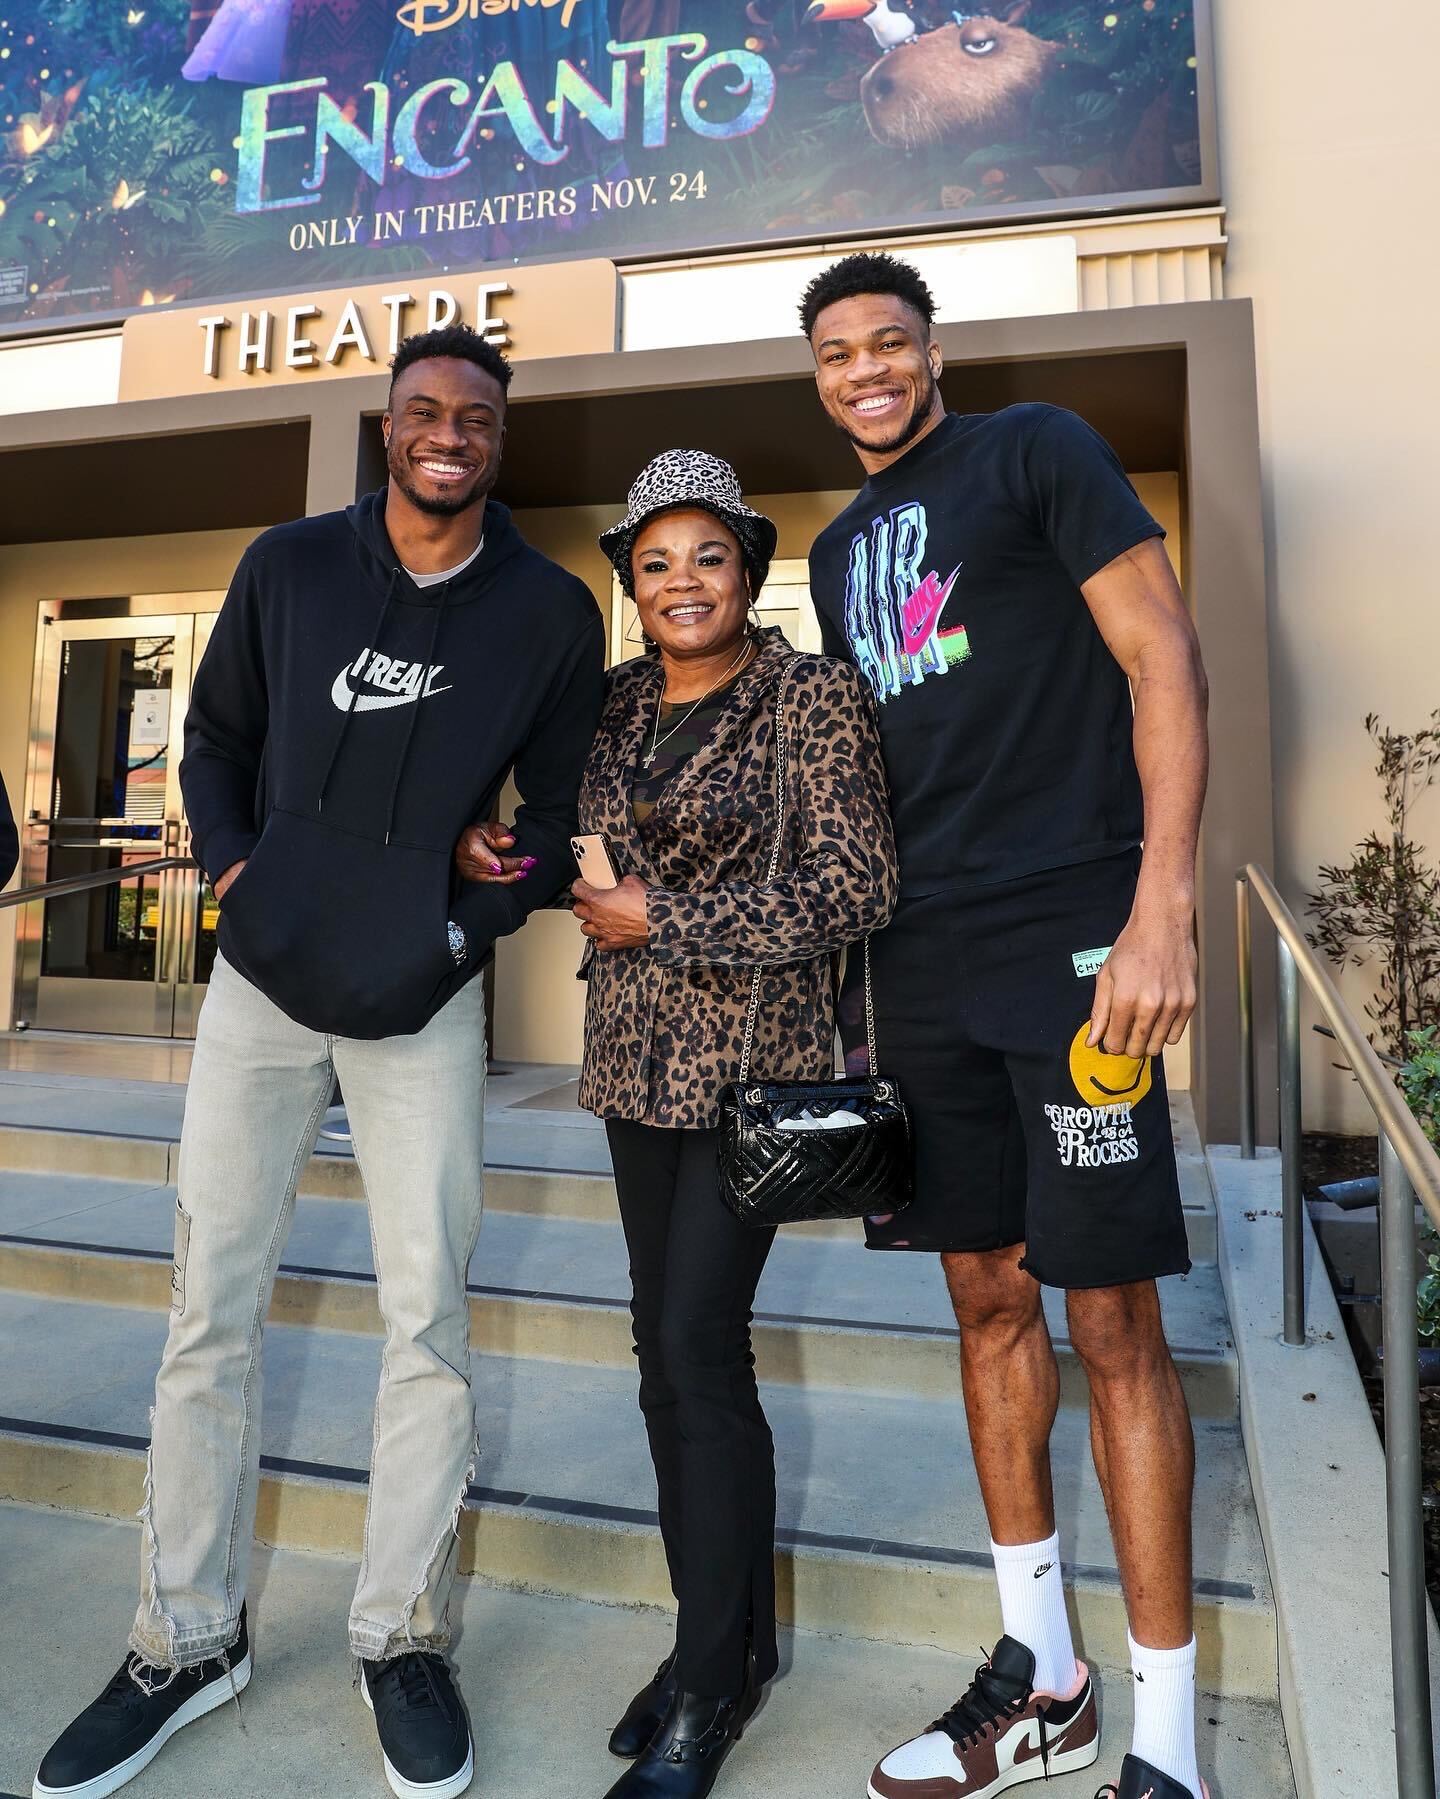 Top Tweets: Giannis introduces the world to Baby Greek Freak